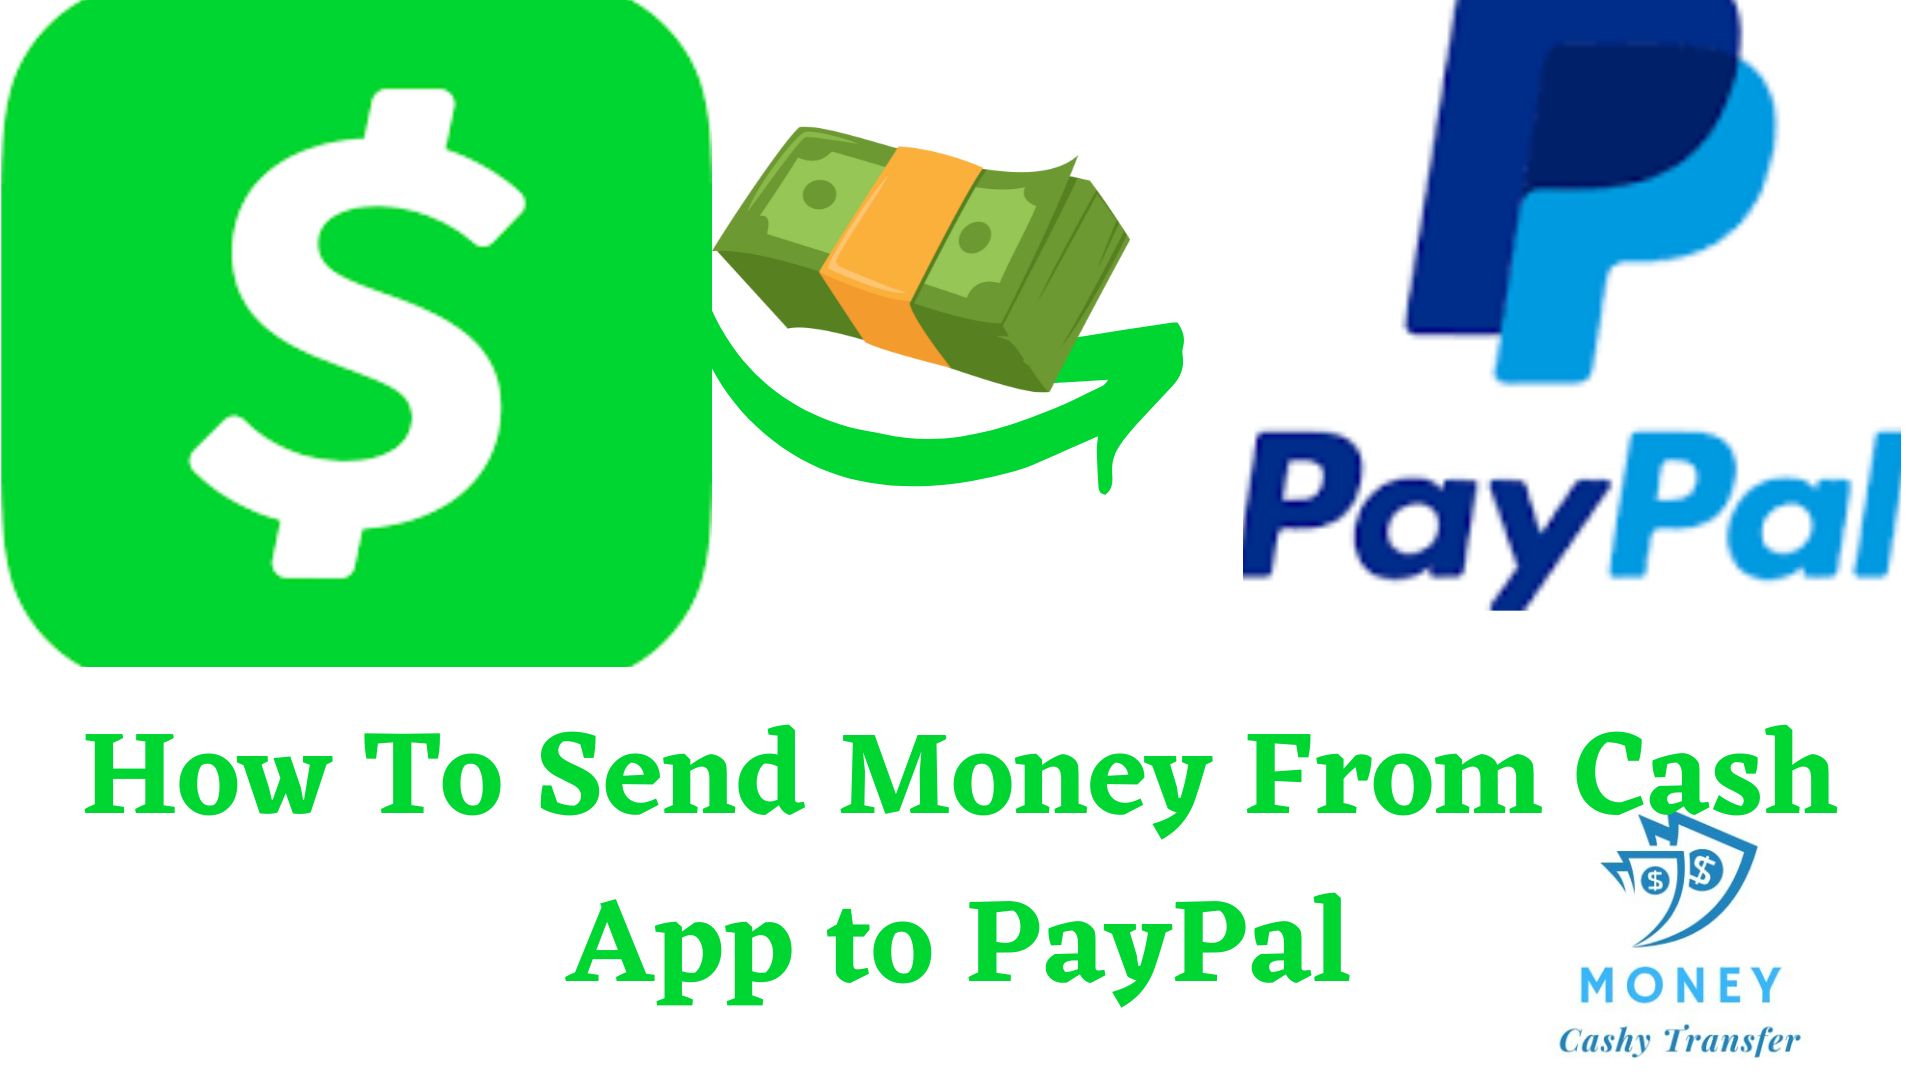 Send Money From Cash App to PayPal